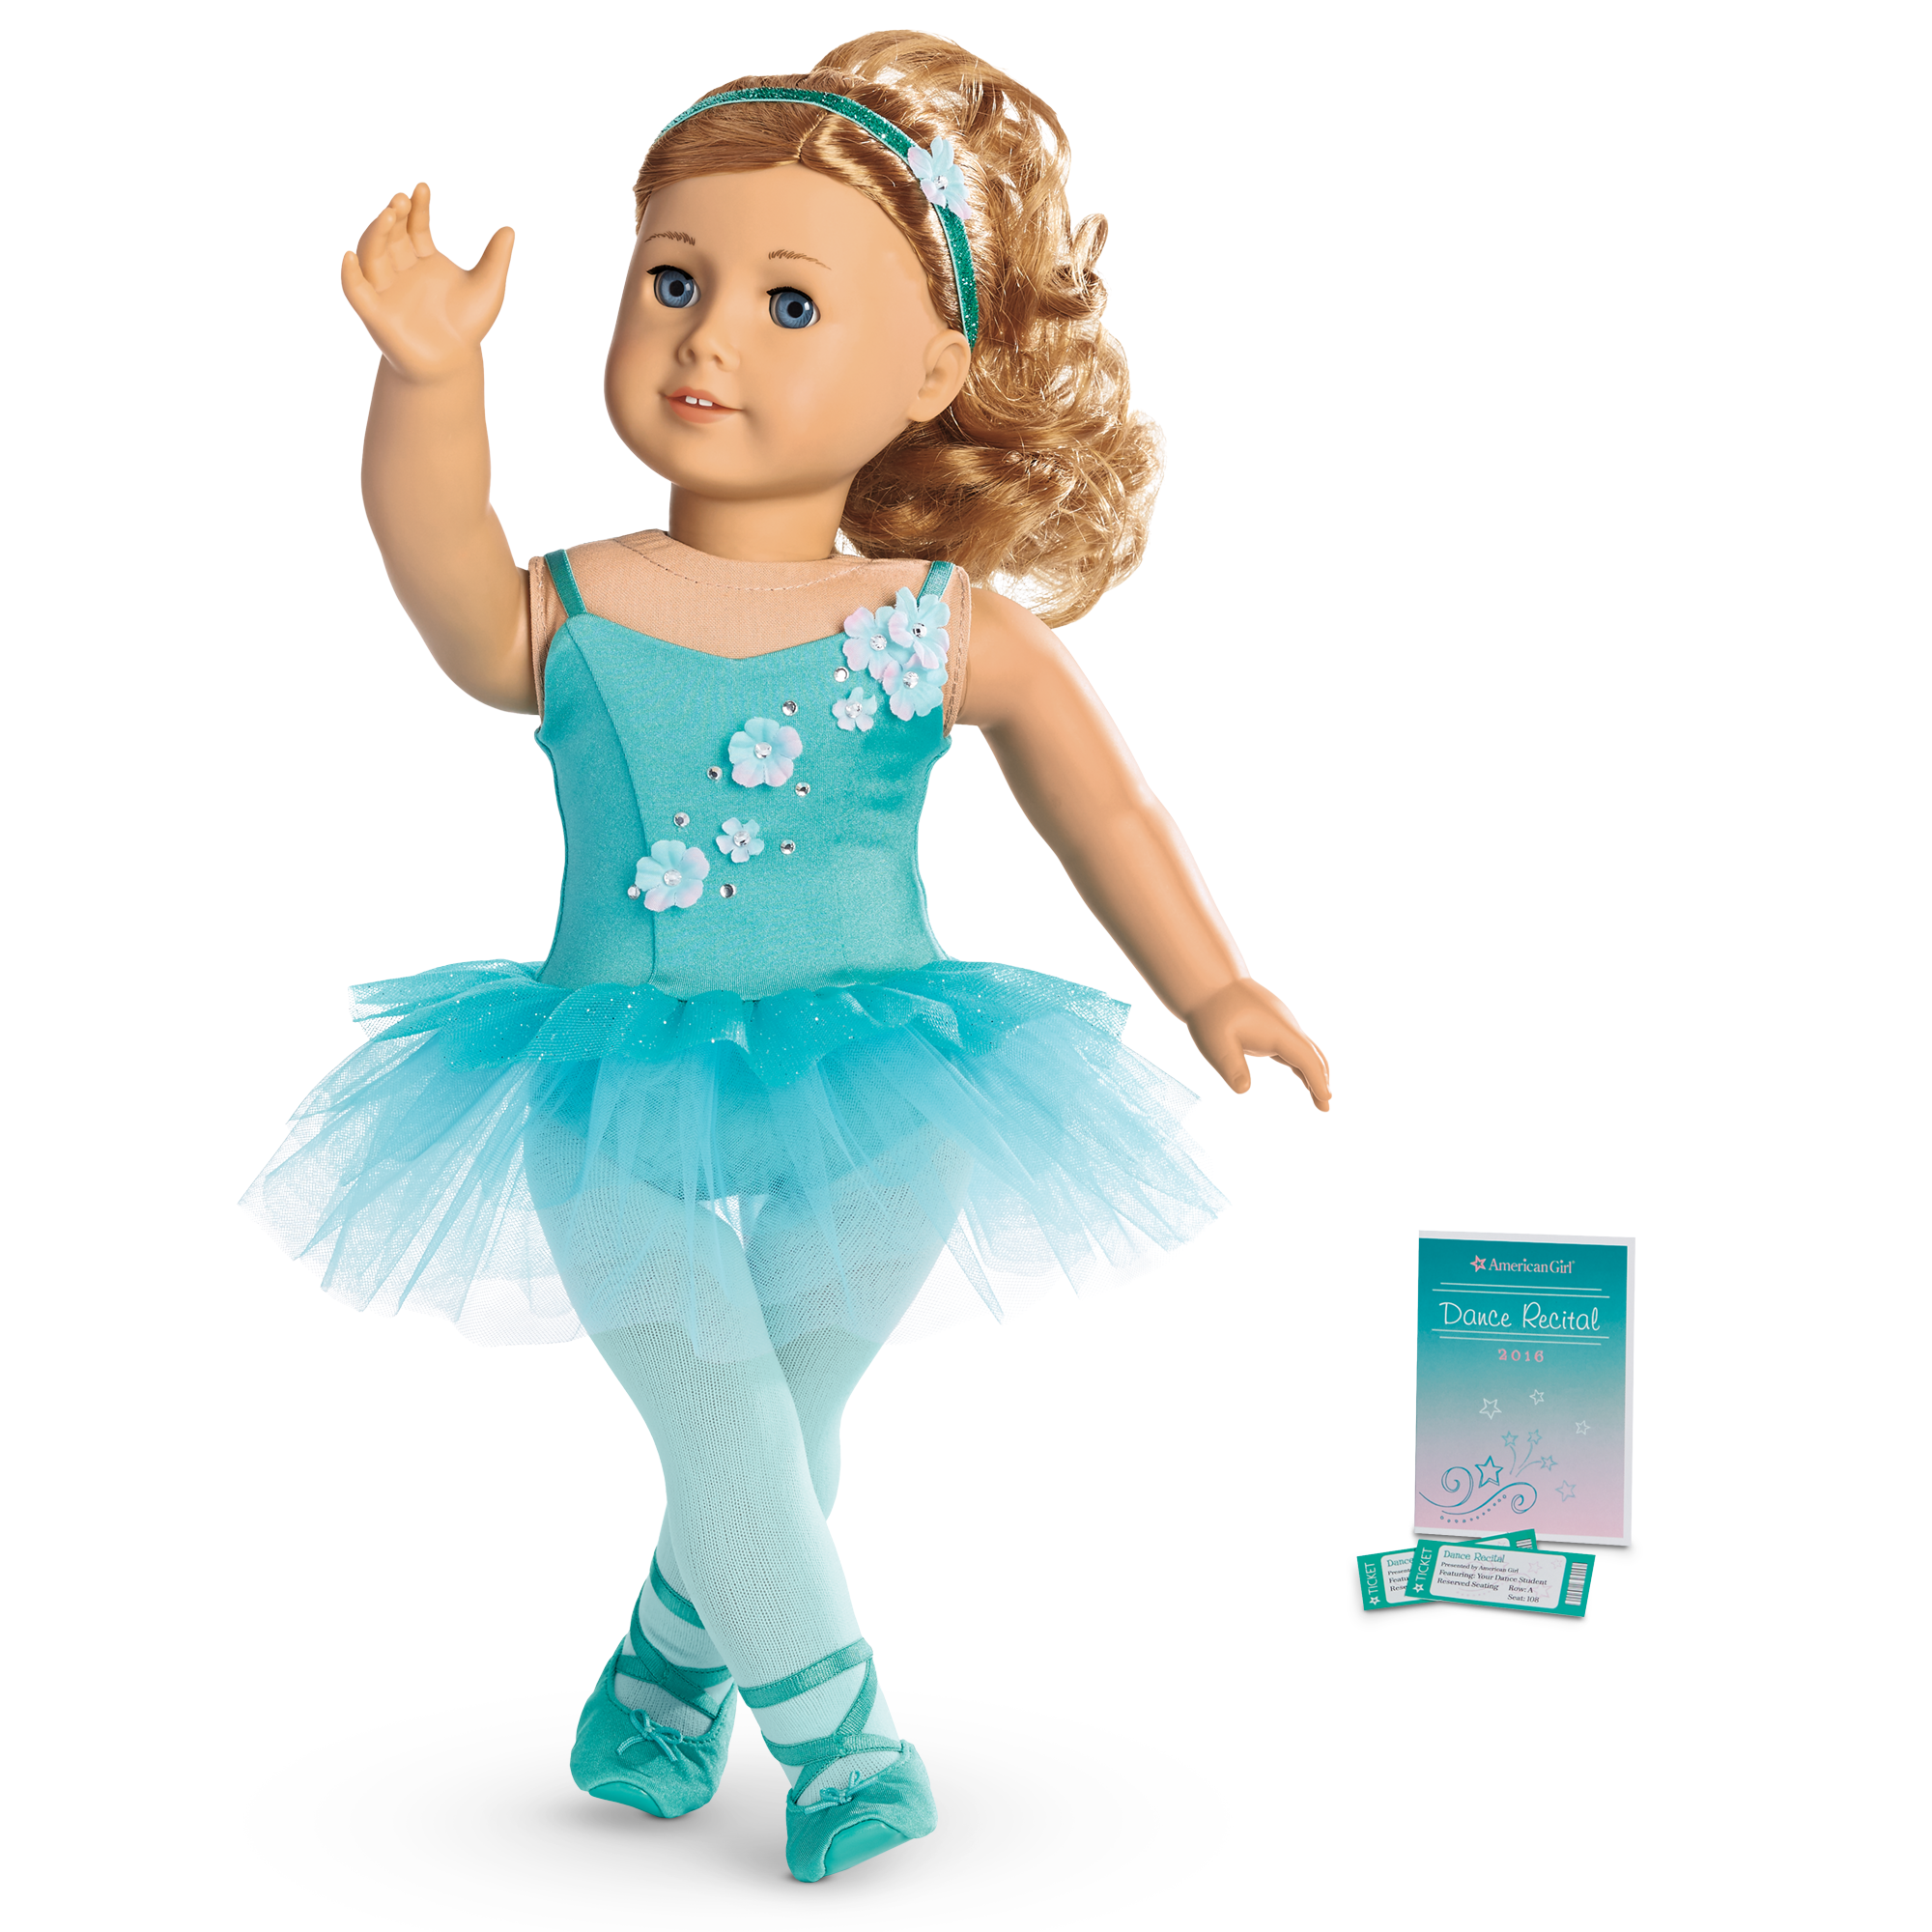 Ombre Ballet Outfit | American Girl Wiki | Fandom